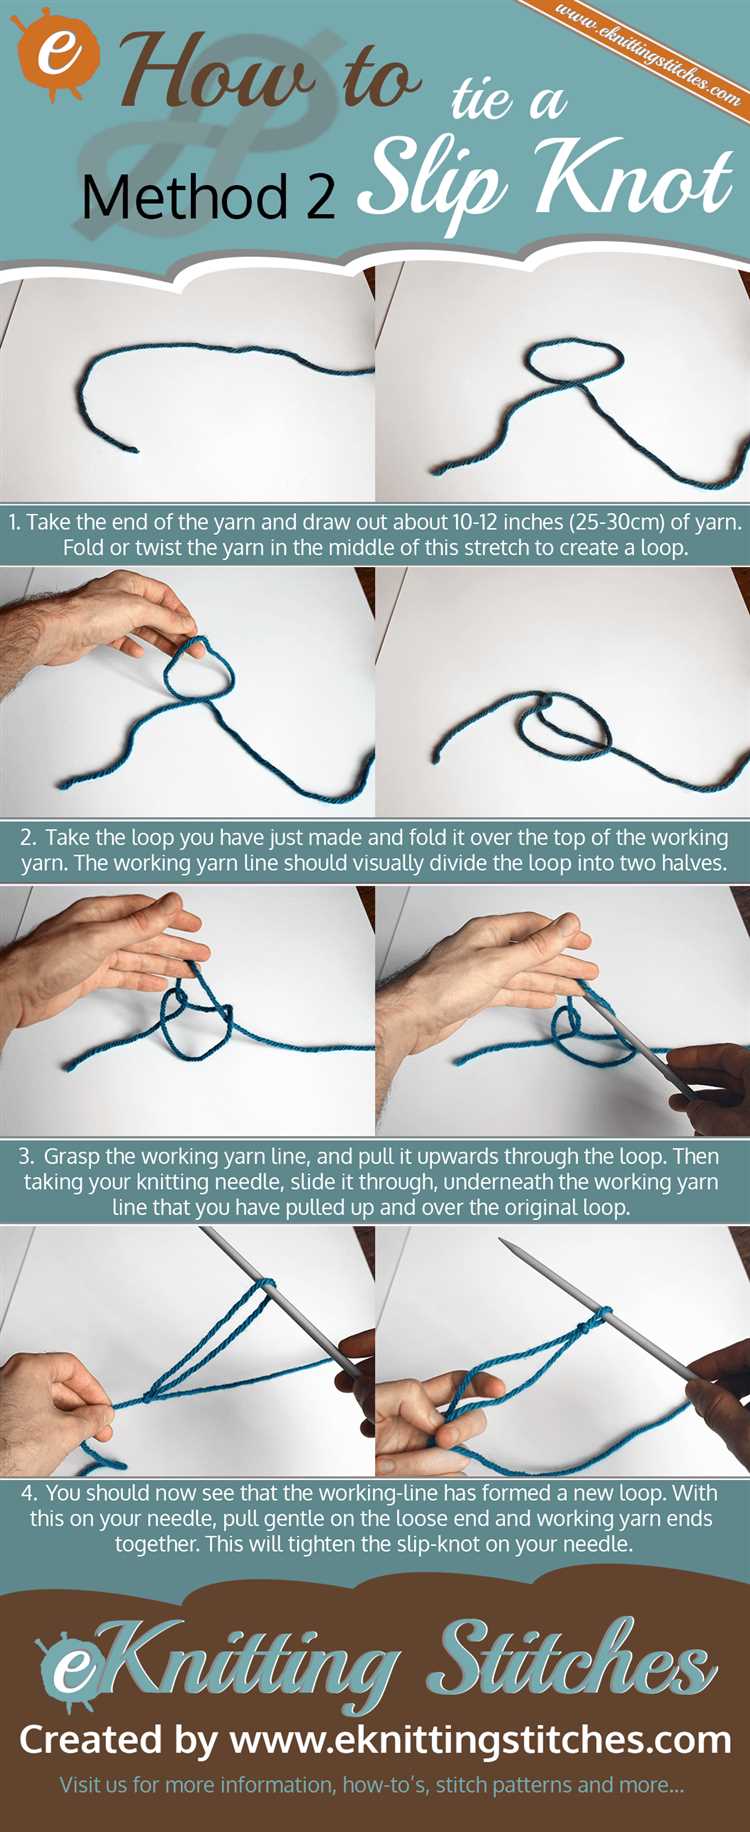 Step 4: Tighten the knot